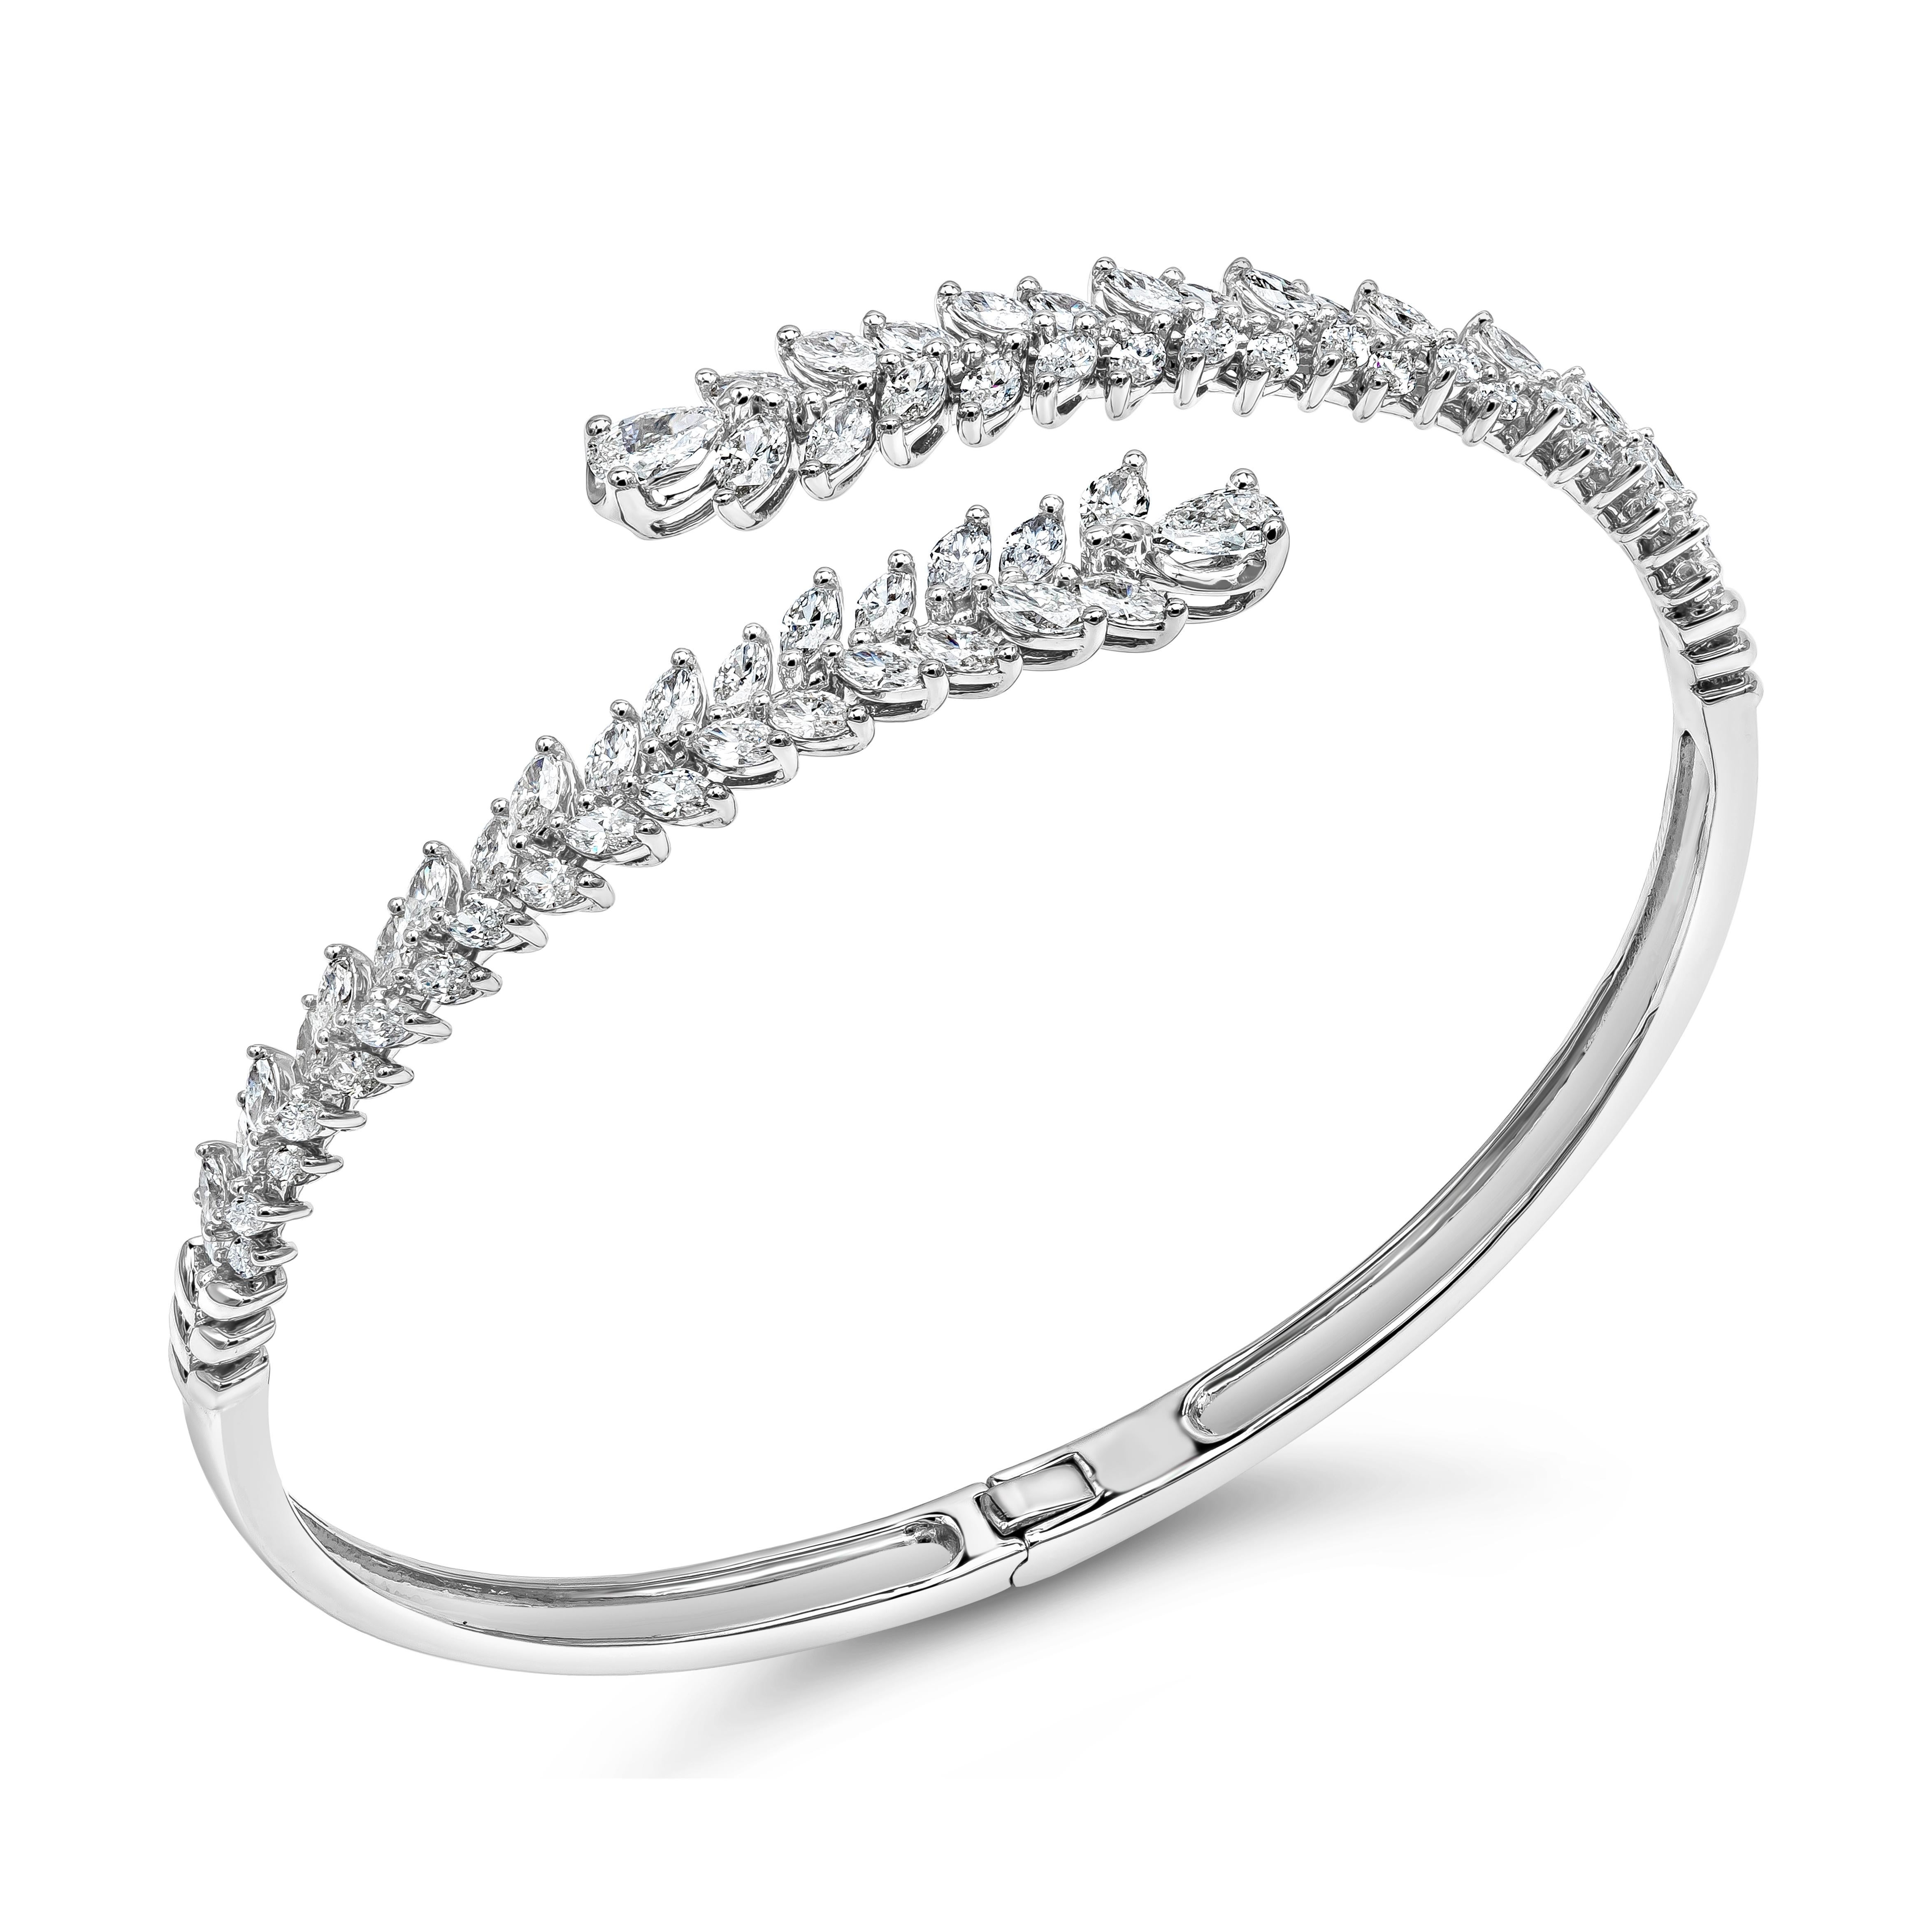 A unique and fashionable bangle bracelet showcasing brilliant marquise and pear shape diamonds, set in a bypass wreath design. Diamonds weigh 2.82 carats total, F-G Color and VS-Si in Clarity. Made with 18K White Gold

Roman Malakov is a custom